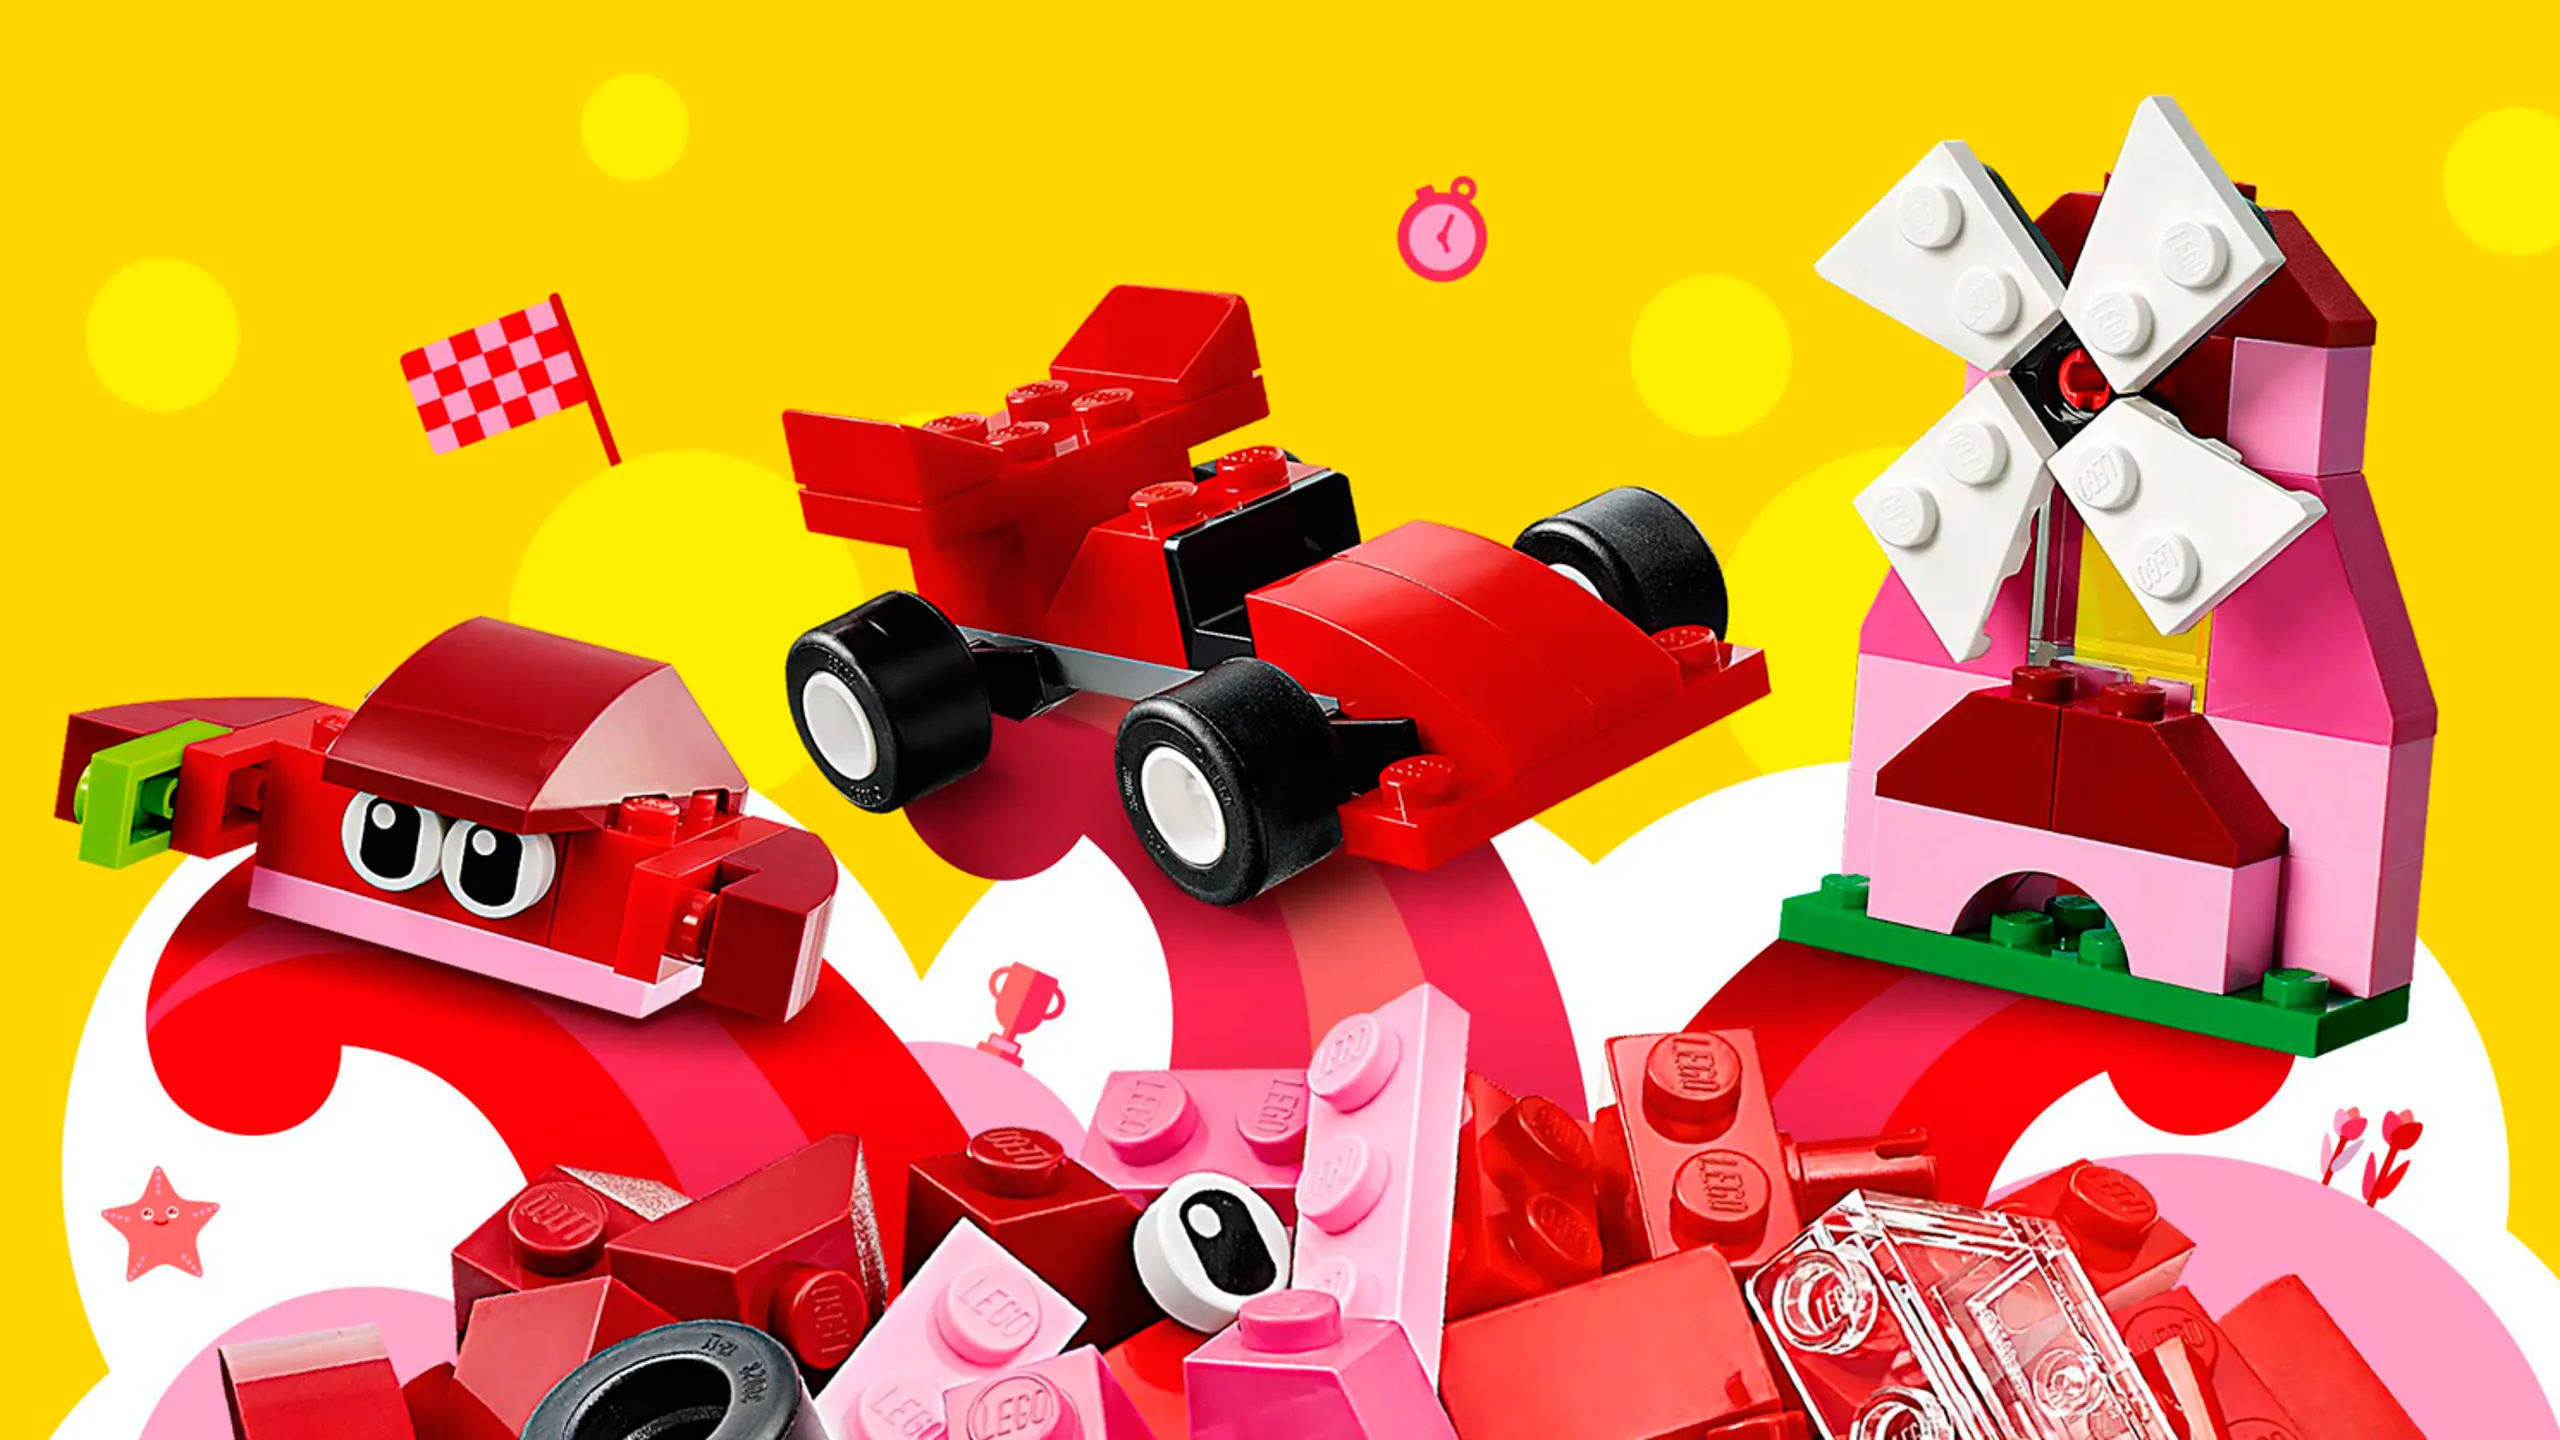 LEGO Classic Red Creativity Box - 10707 - Use red and pink bricks to build a crab, a race car or a mill!